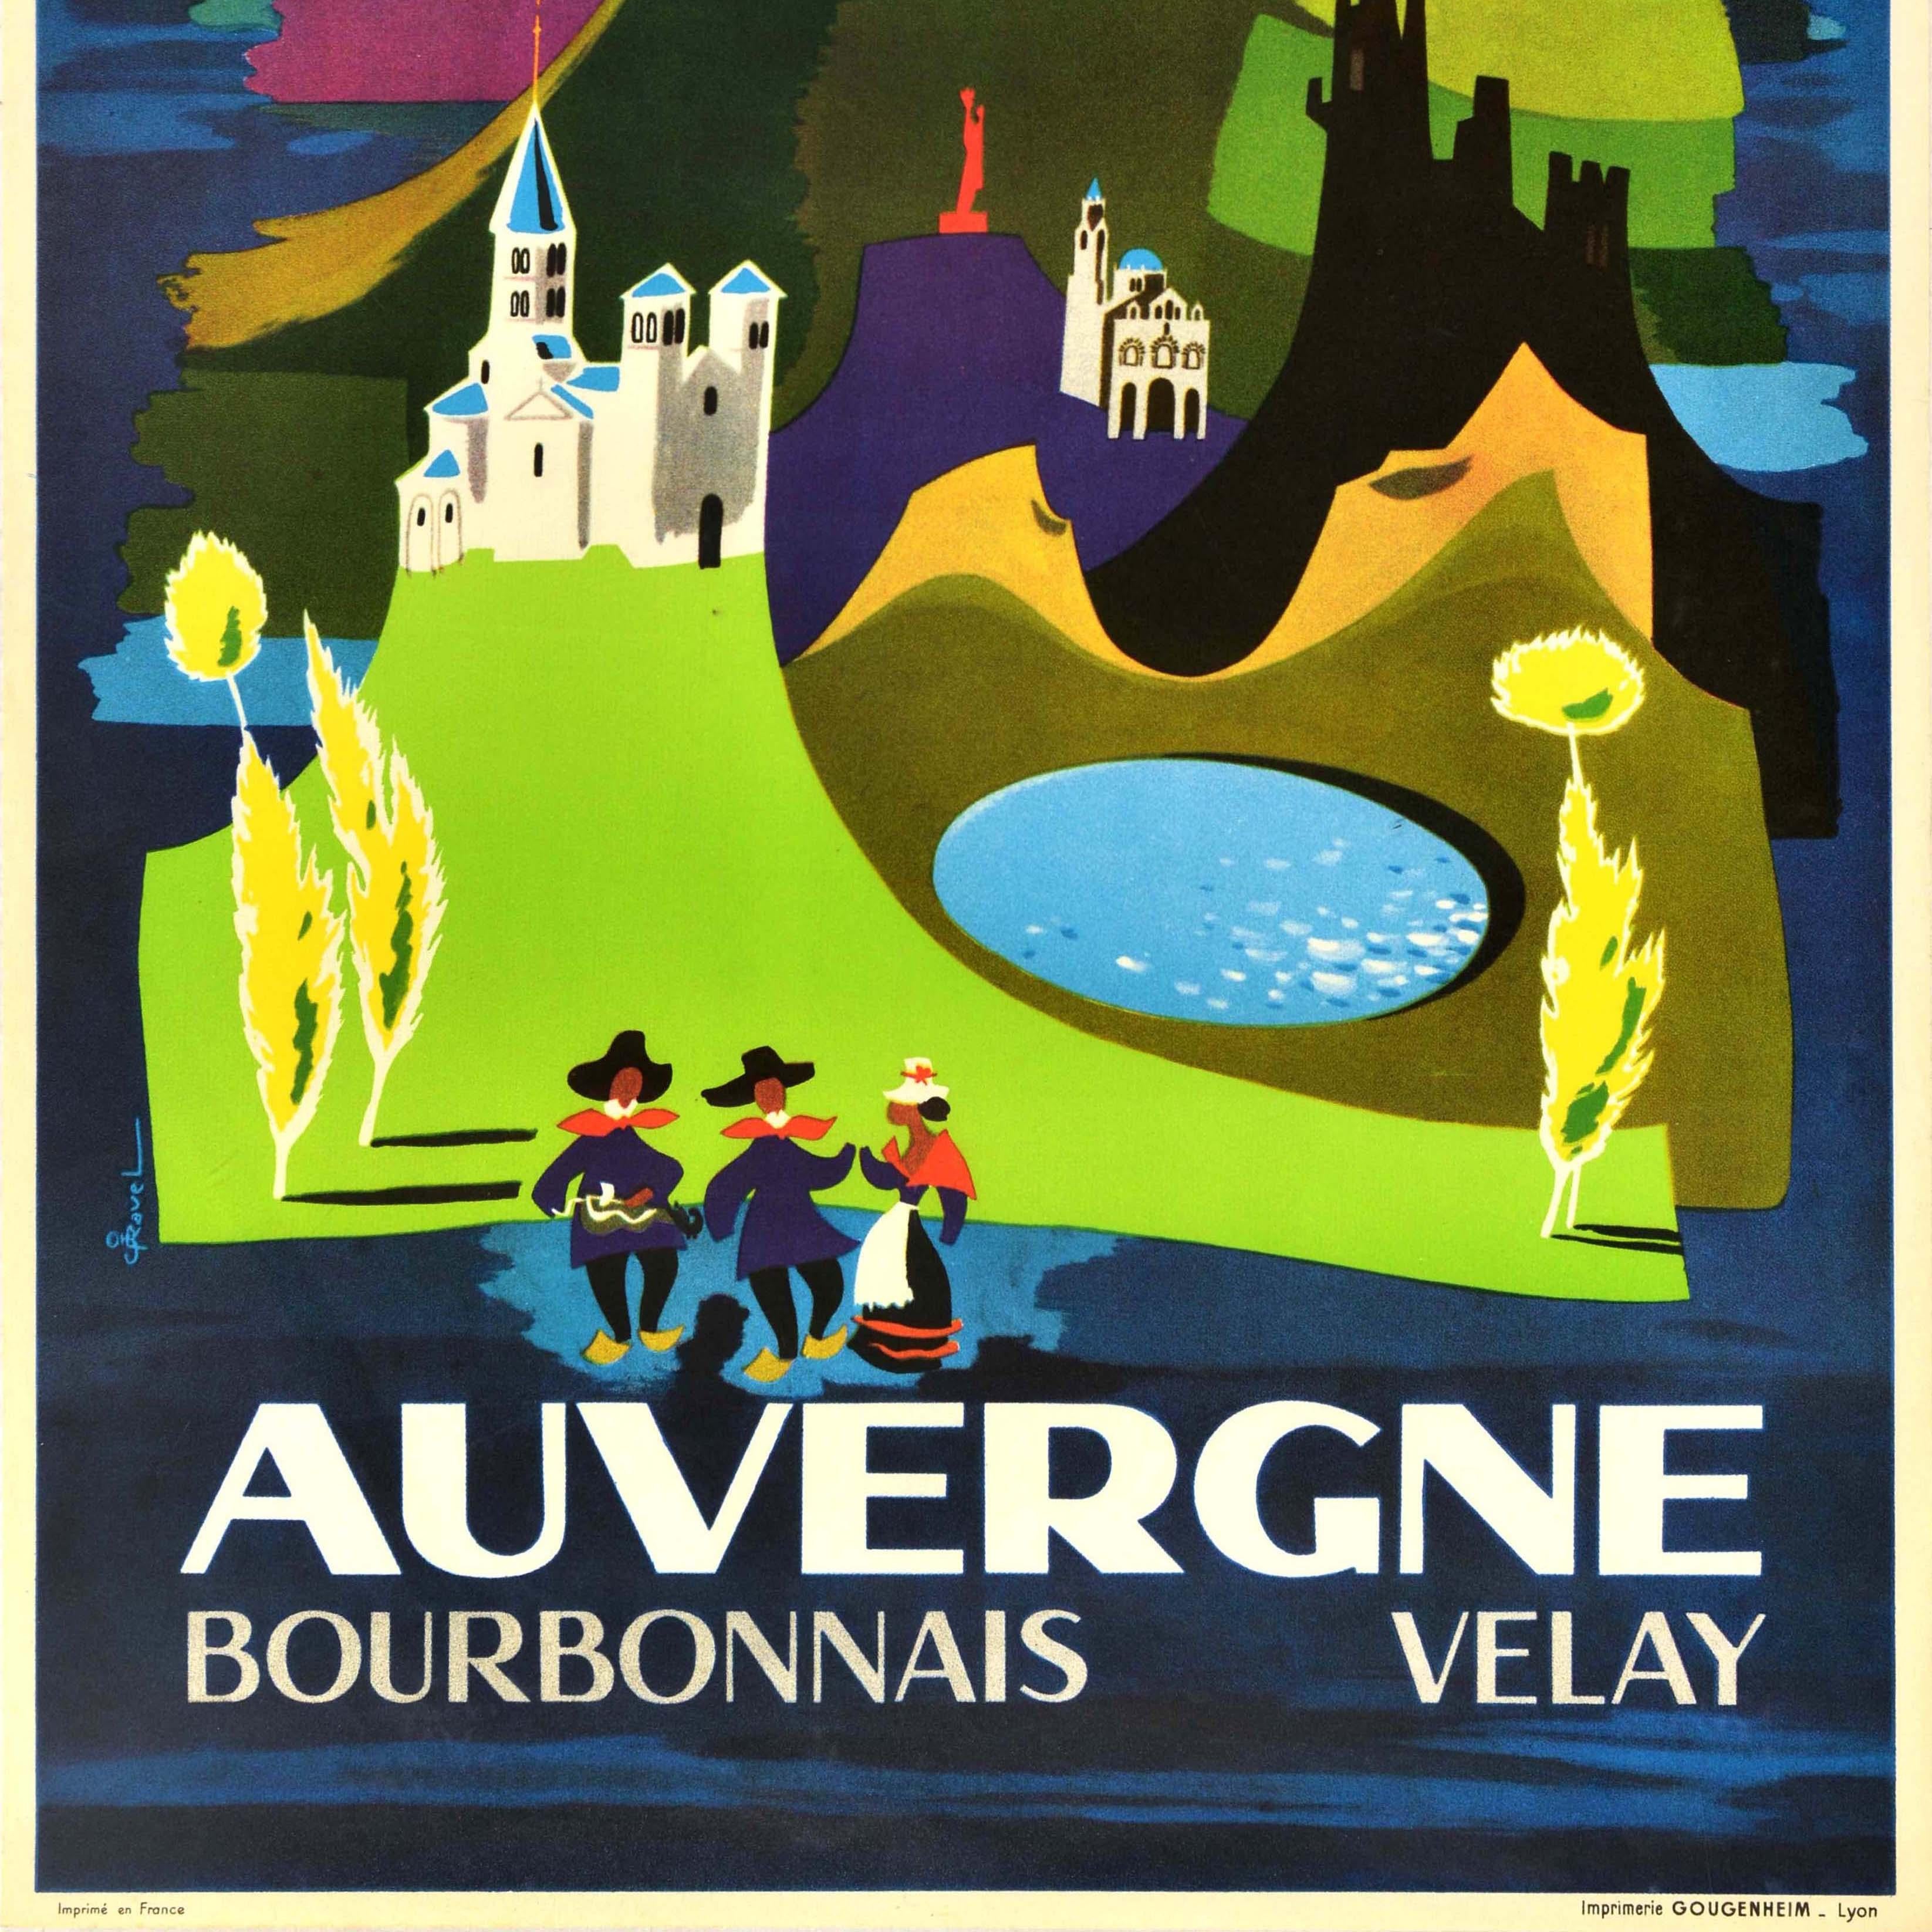 Original Vintage Travel Poster Auvergne Bourbonnais Velay France Holiday Design In Good Condition For Sale In London, GB